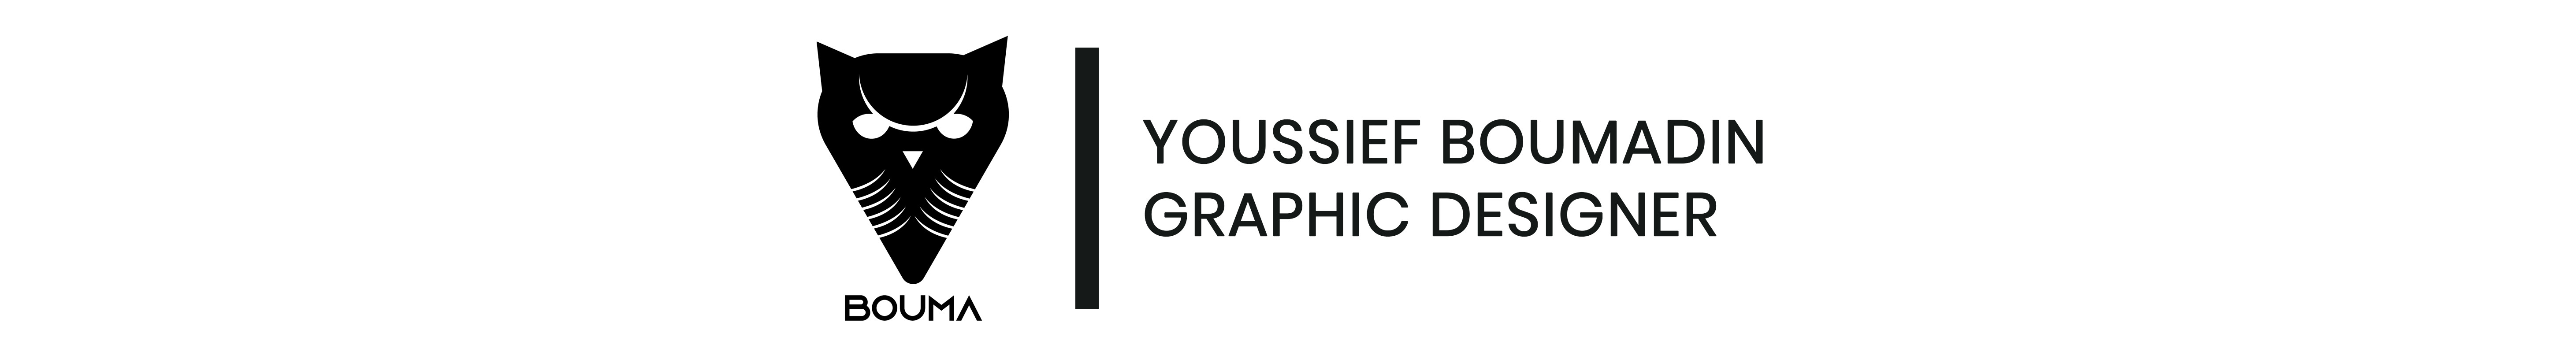 youssief Boumadin's profile banner